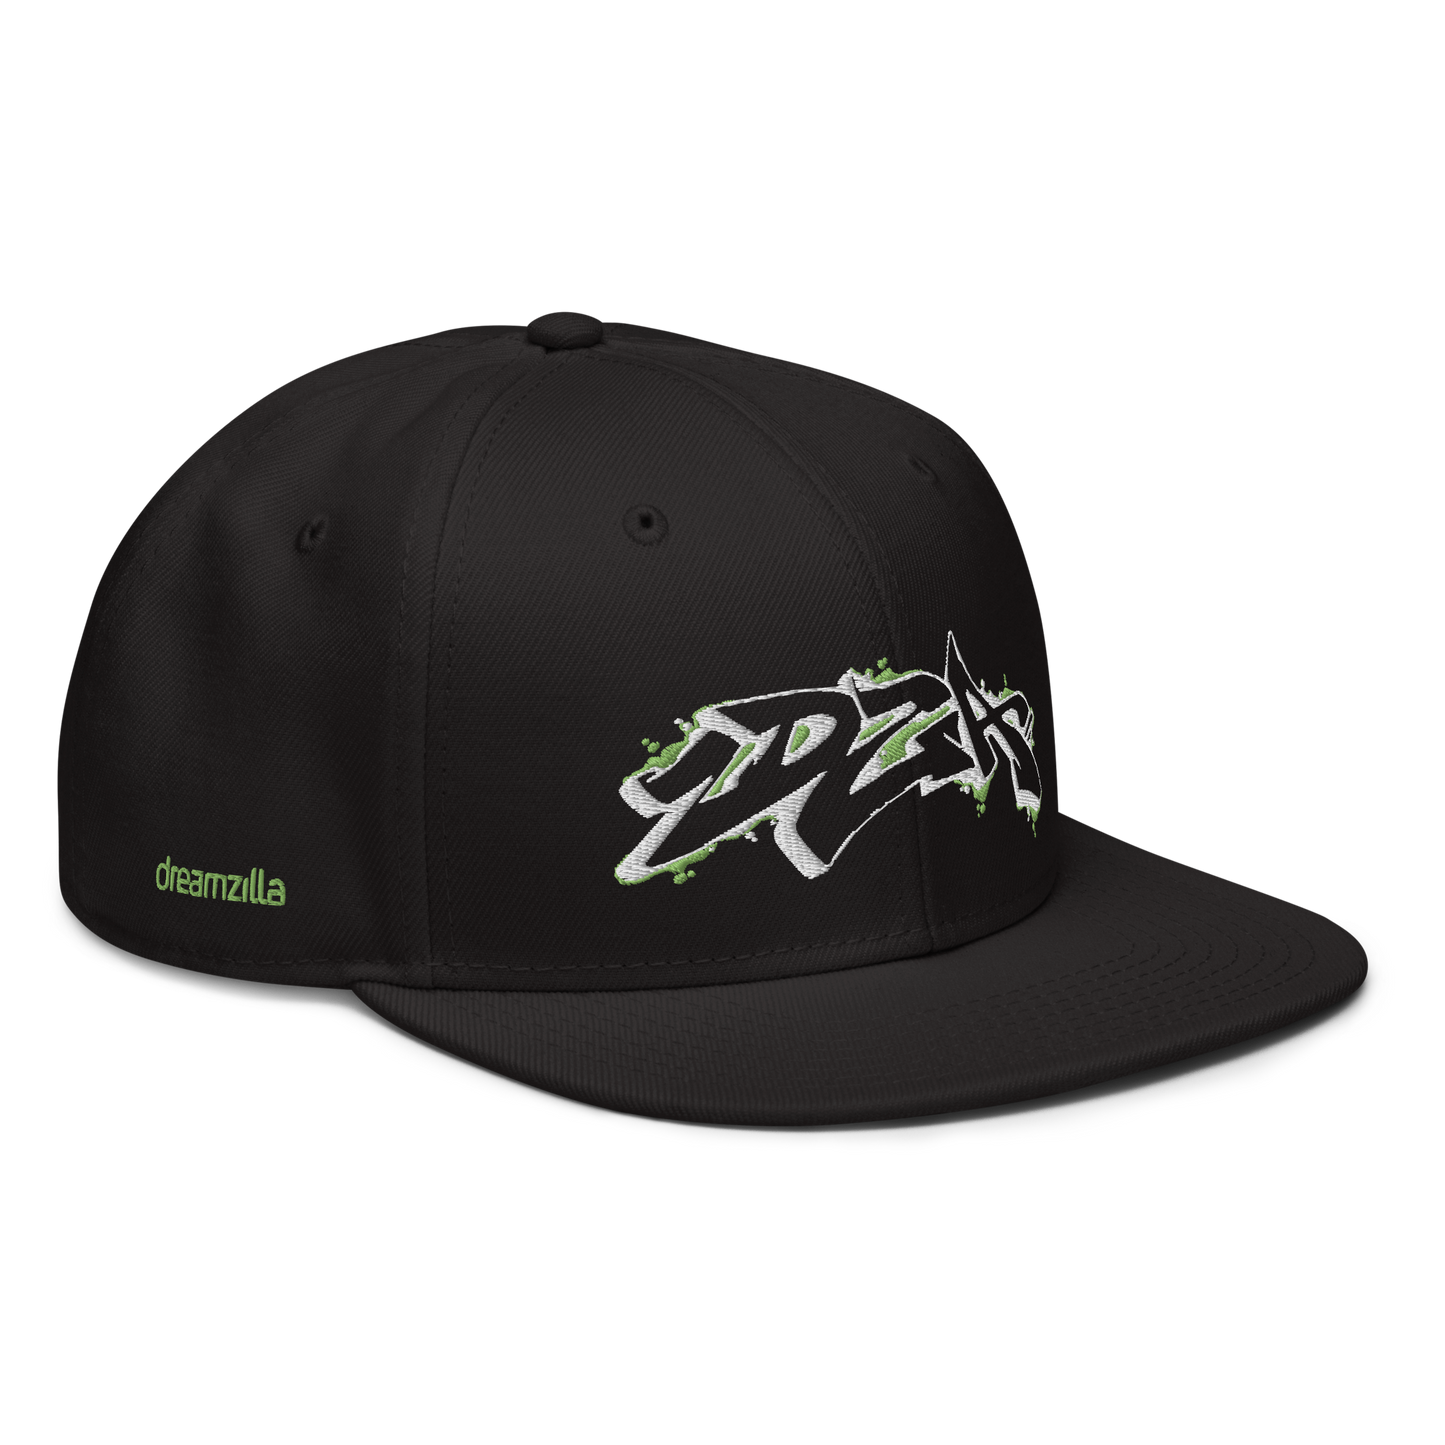 Angled View of Graffiti DZA Snapback by Sanitor in Black